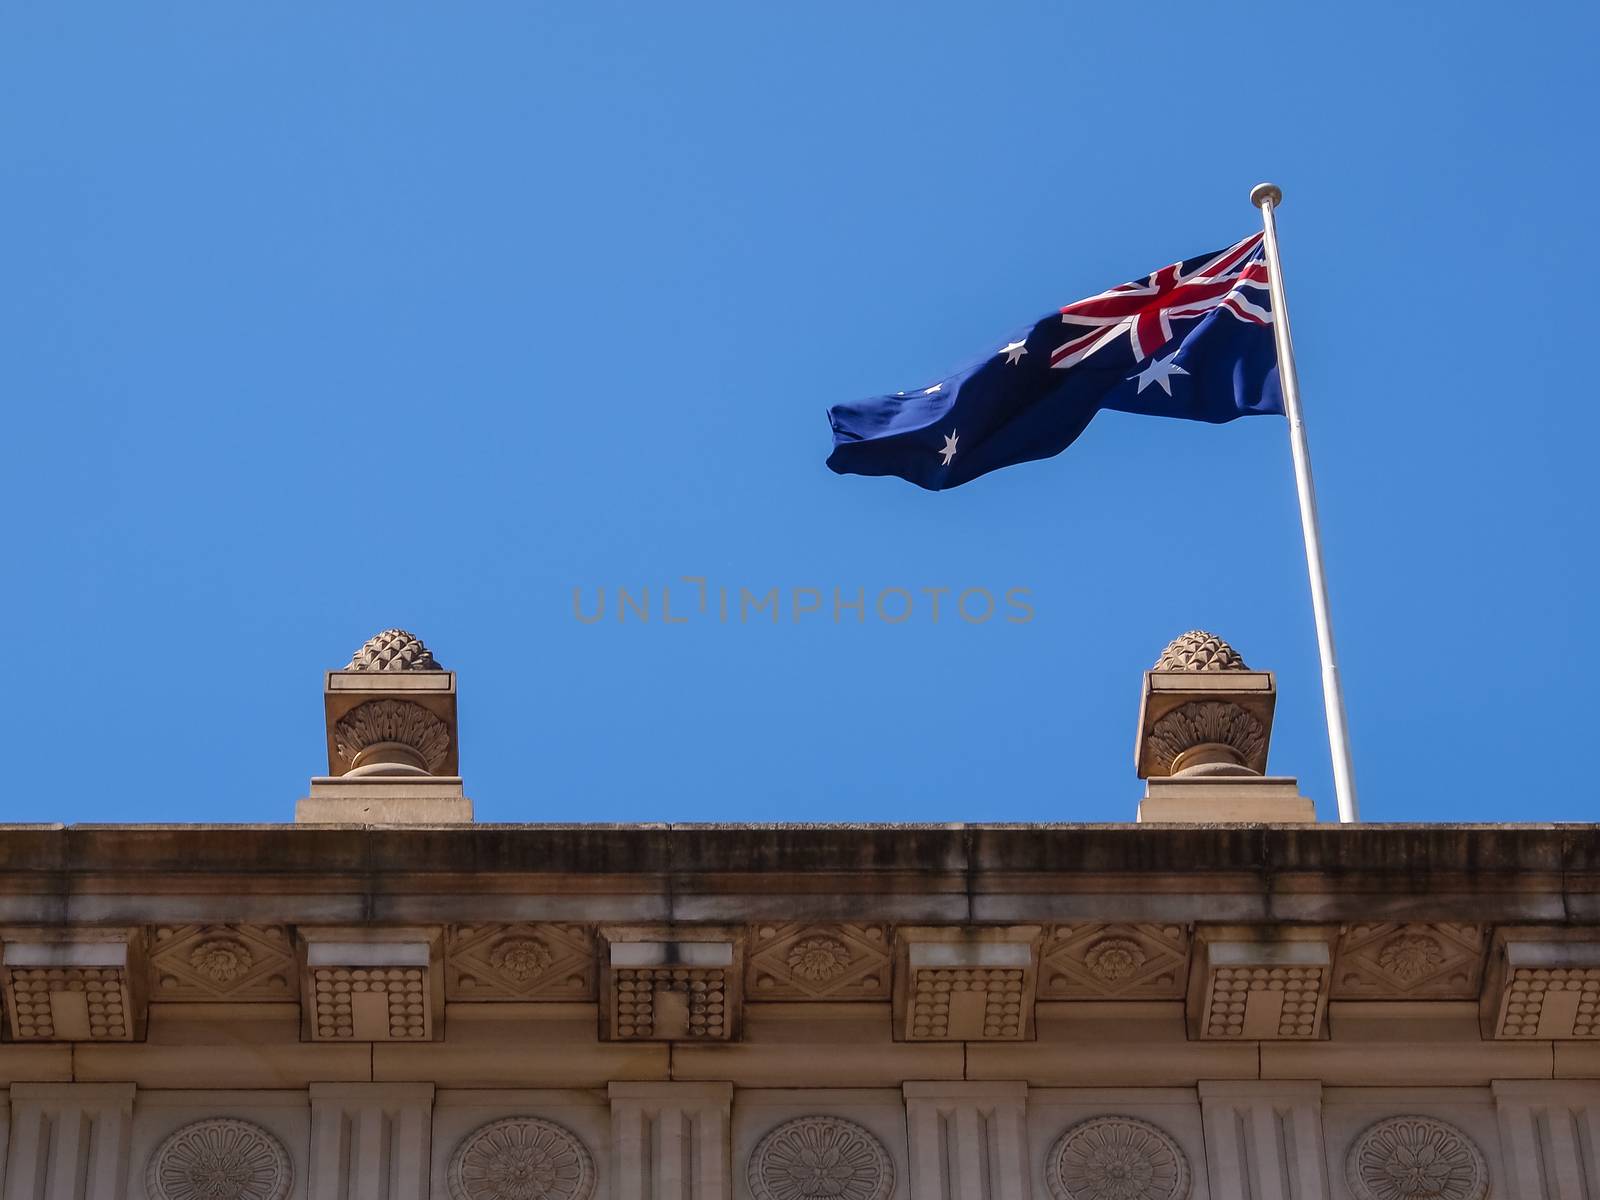 Australian flag on the top of building with blue sky